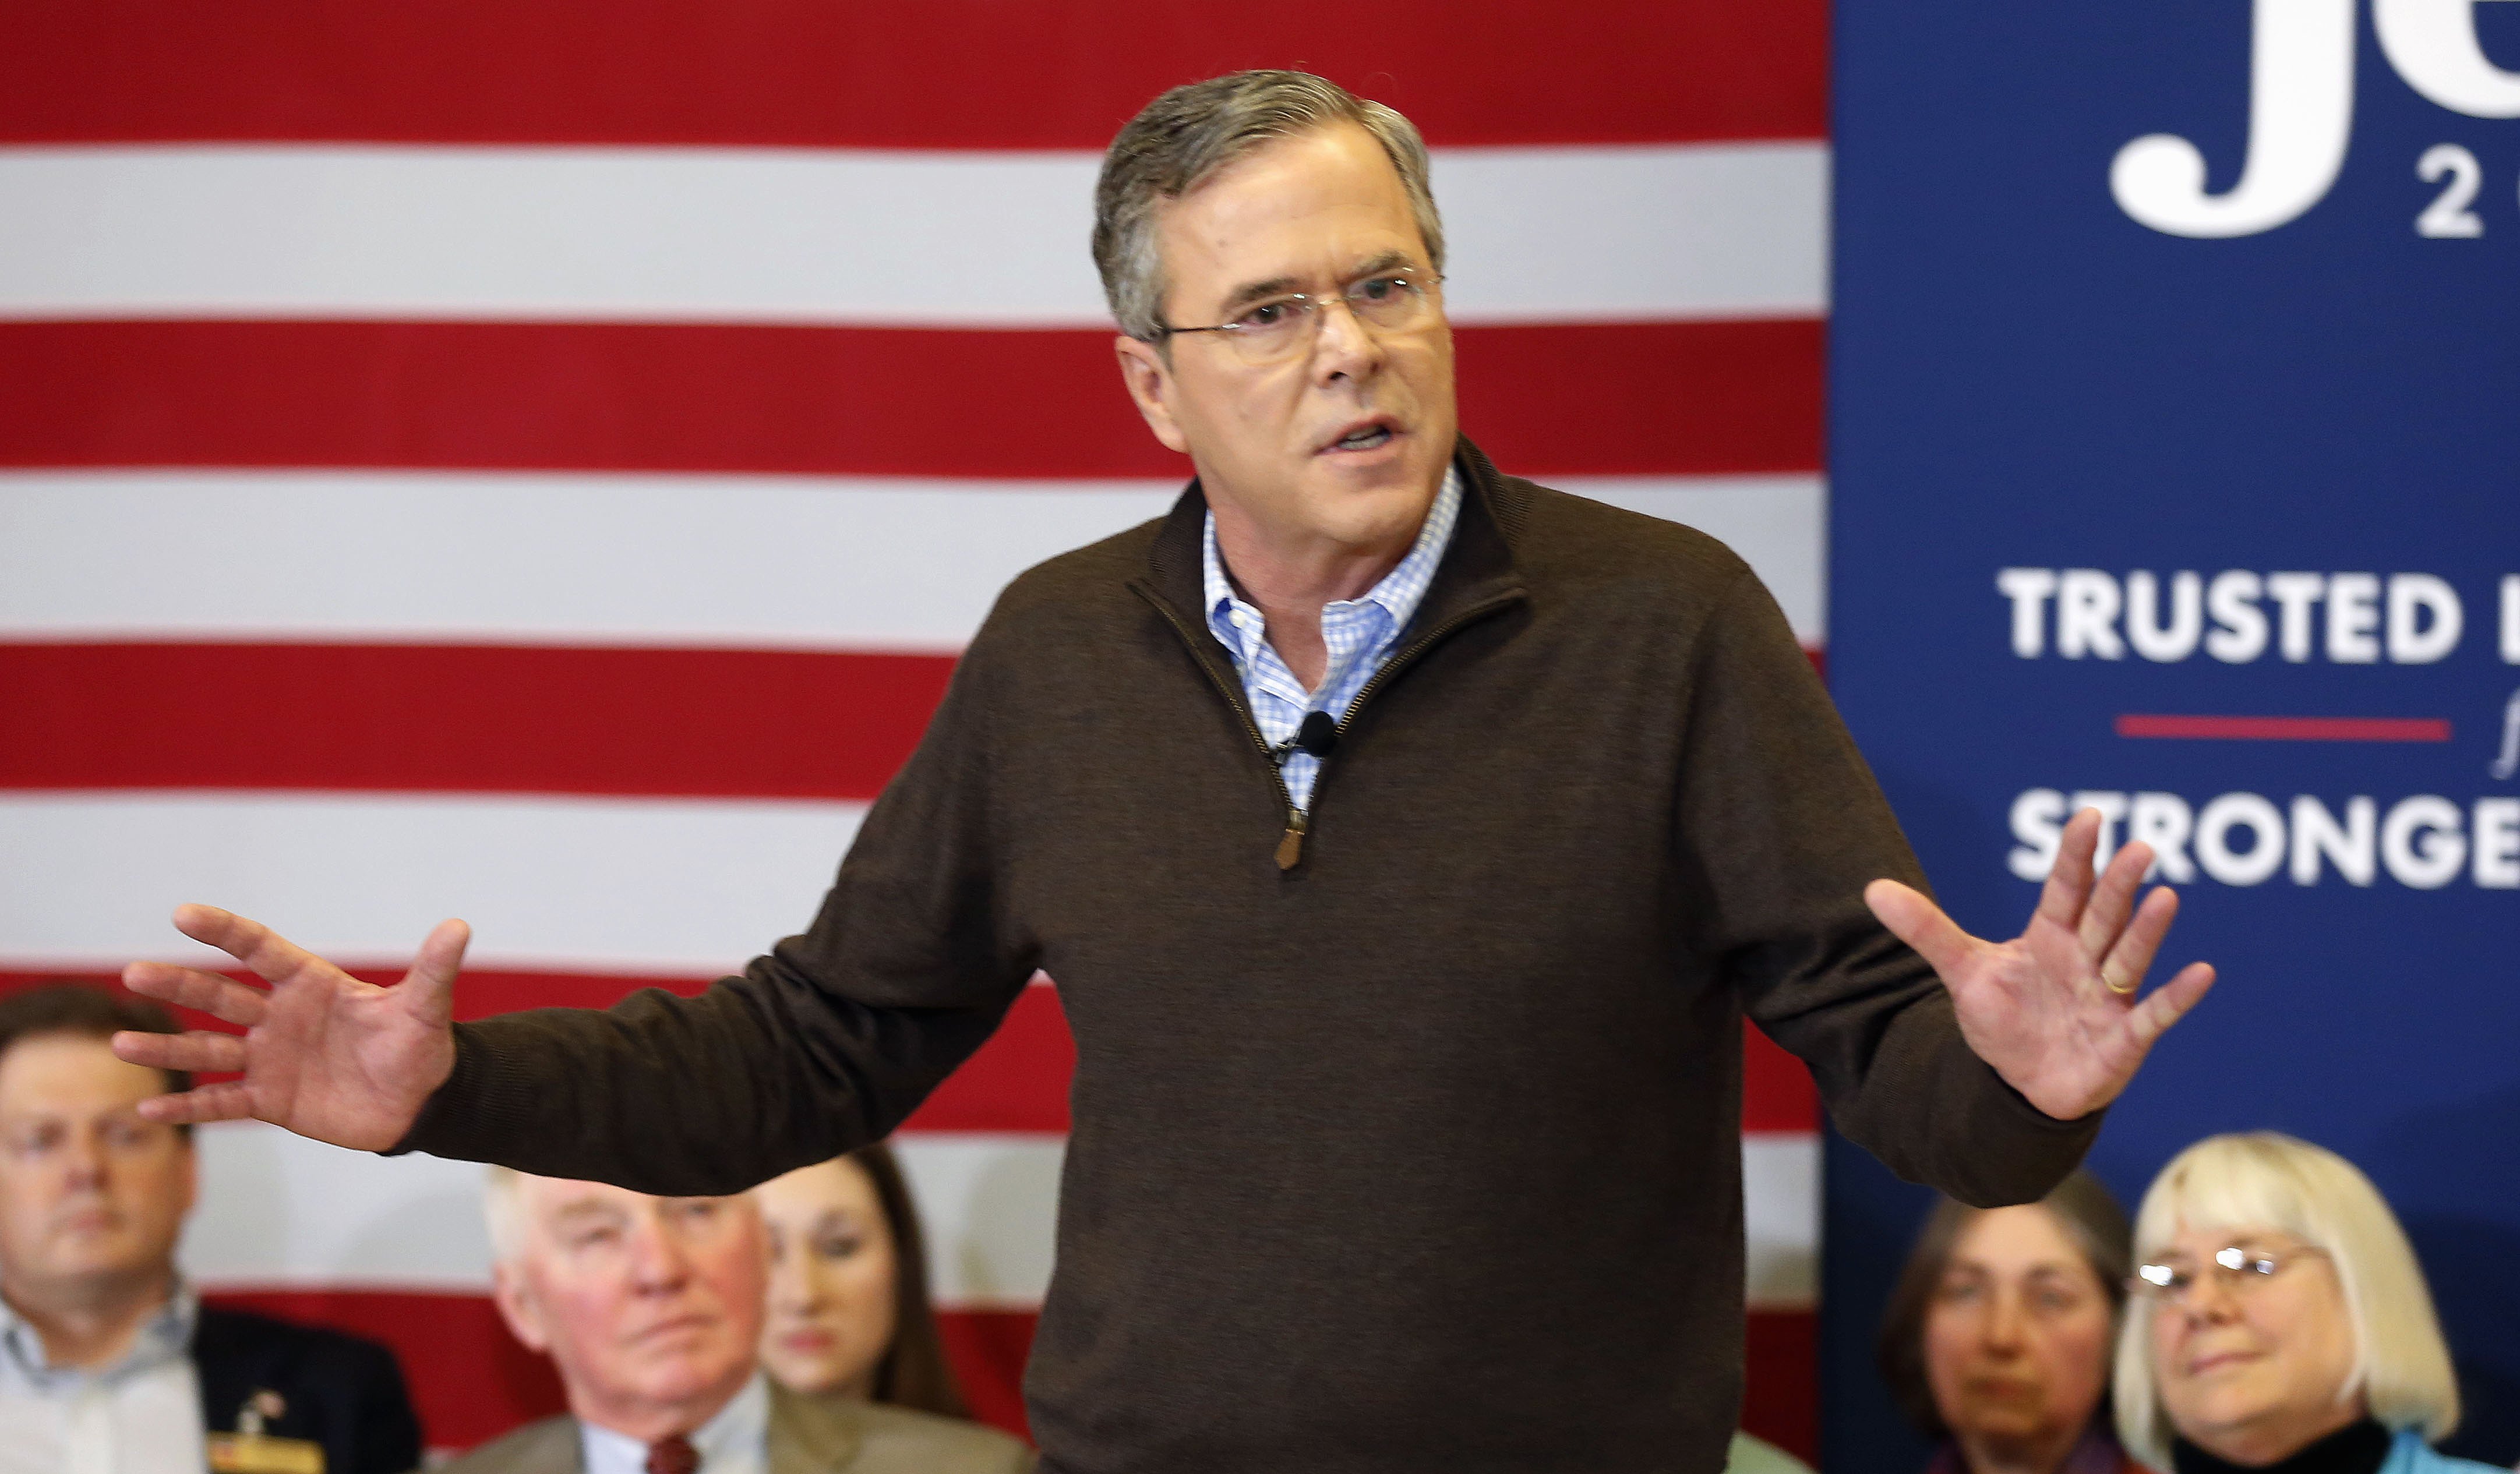 Jeb Bush speaks during a campaign stop at Souhegan High School, on Jan. 16, 2016, in Amherst, NH. (Jim Cole—AP)